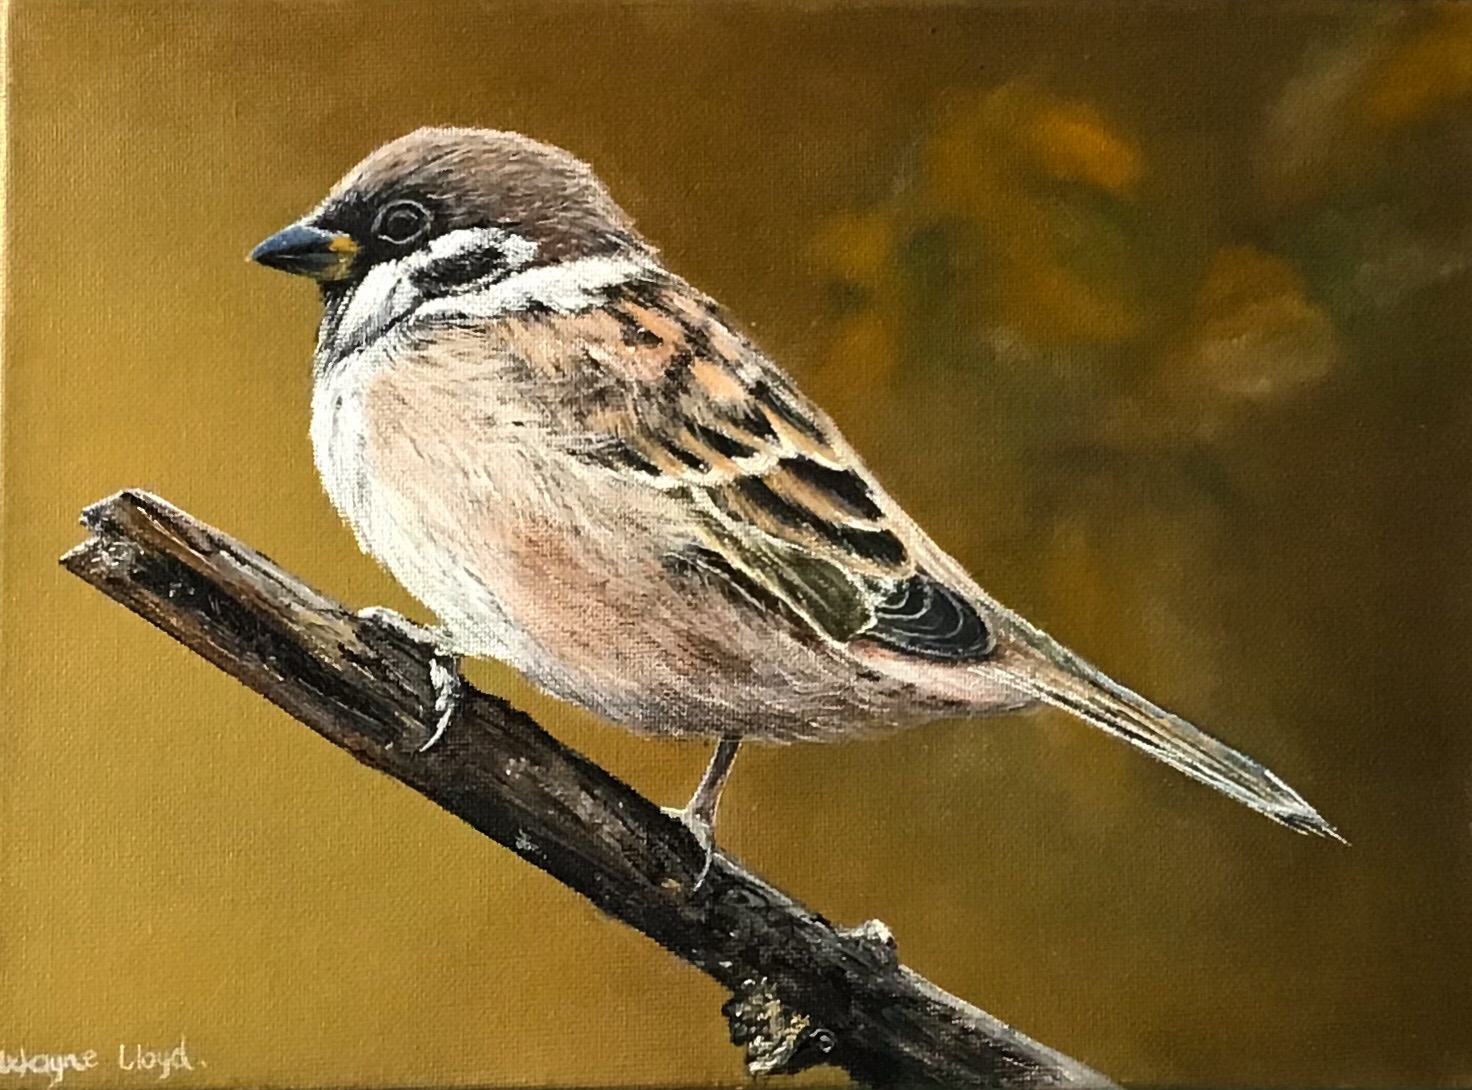 Since my early childhood I have loved birds, especially the smaller garden birds, and in particular one of my favourites is the common House Sparrow . The 'Humble Sparrow' Oil on canvas 400mm x 300mm. Dedicated to Shaun - a friend and an exceptional 'Muso'.'